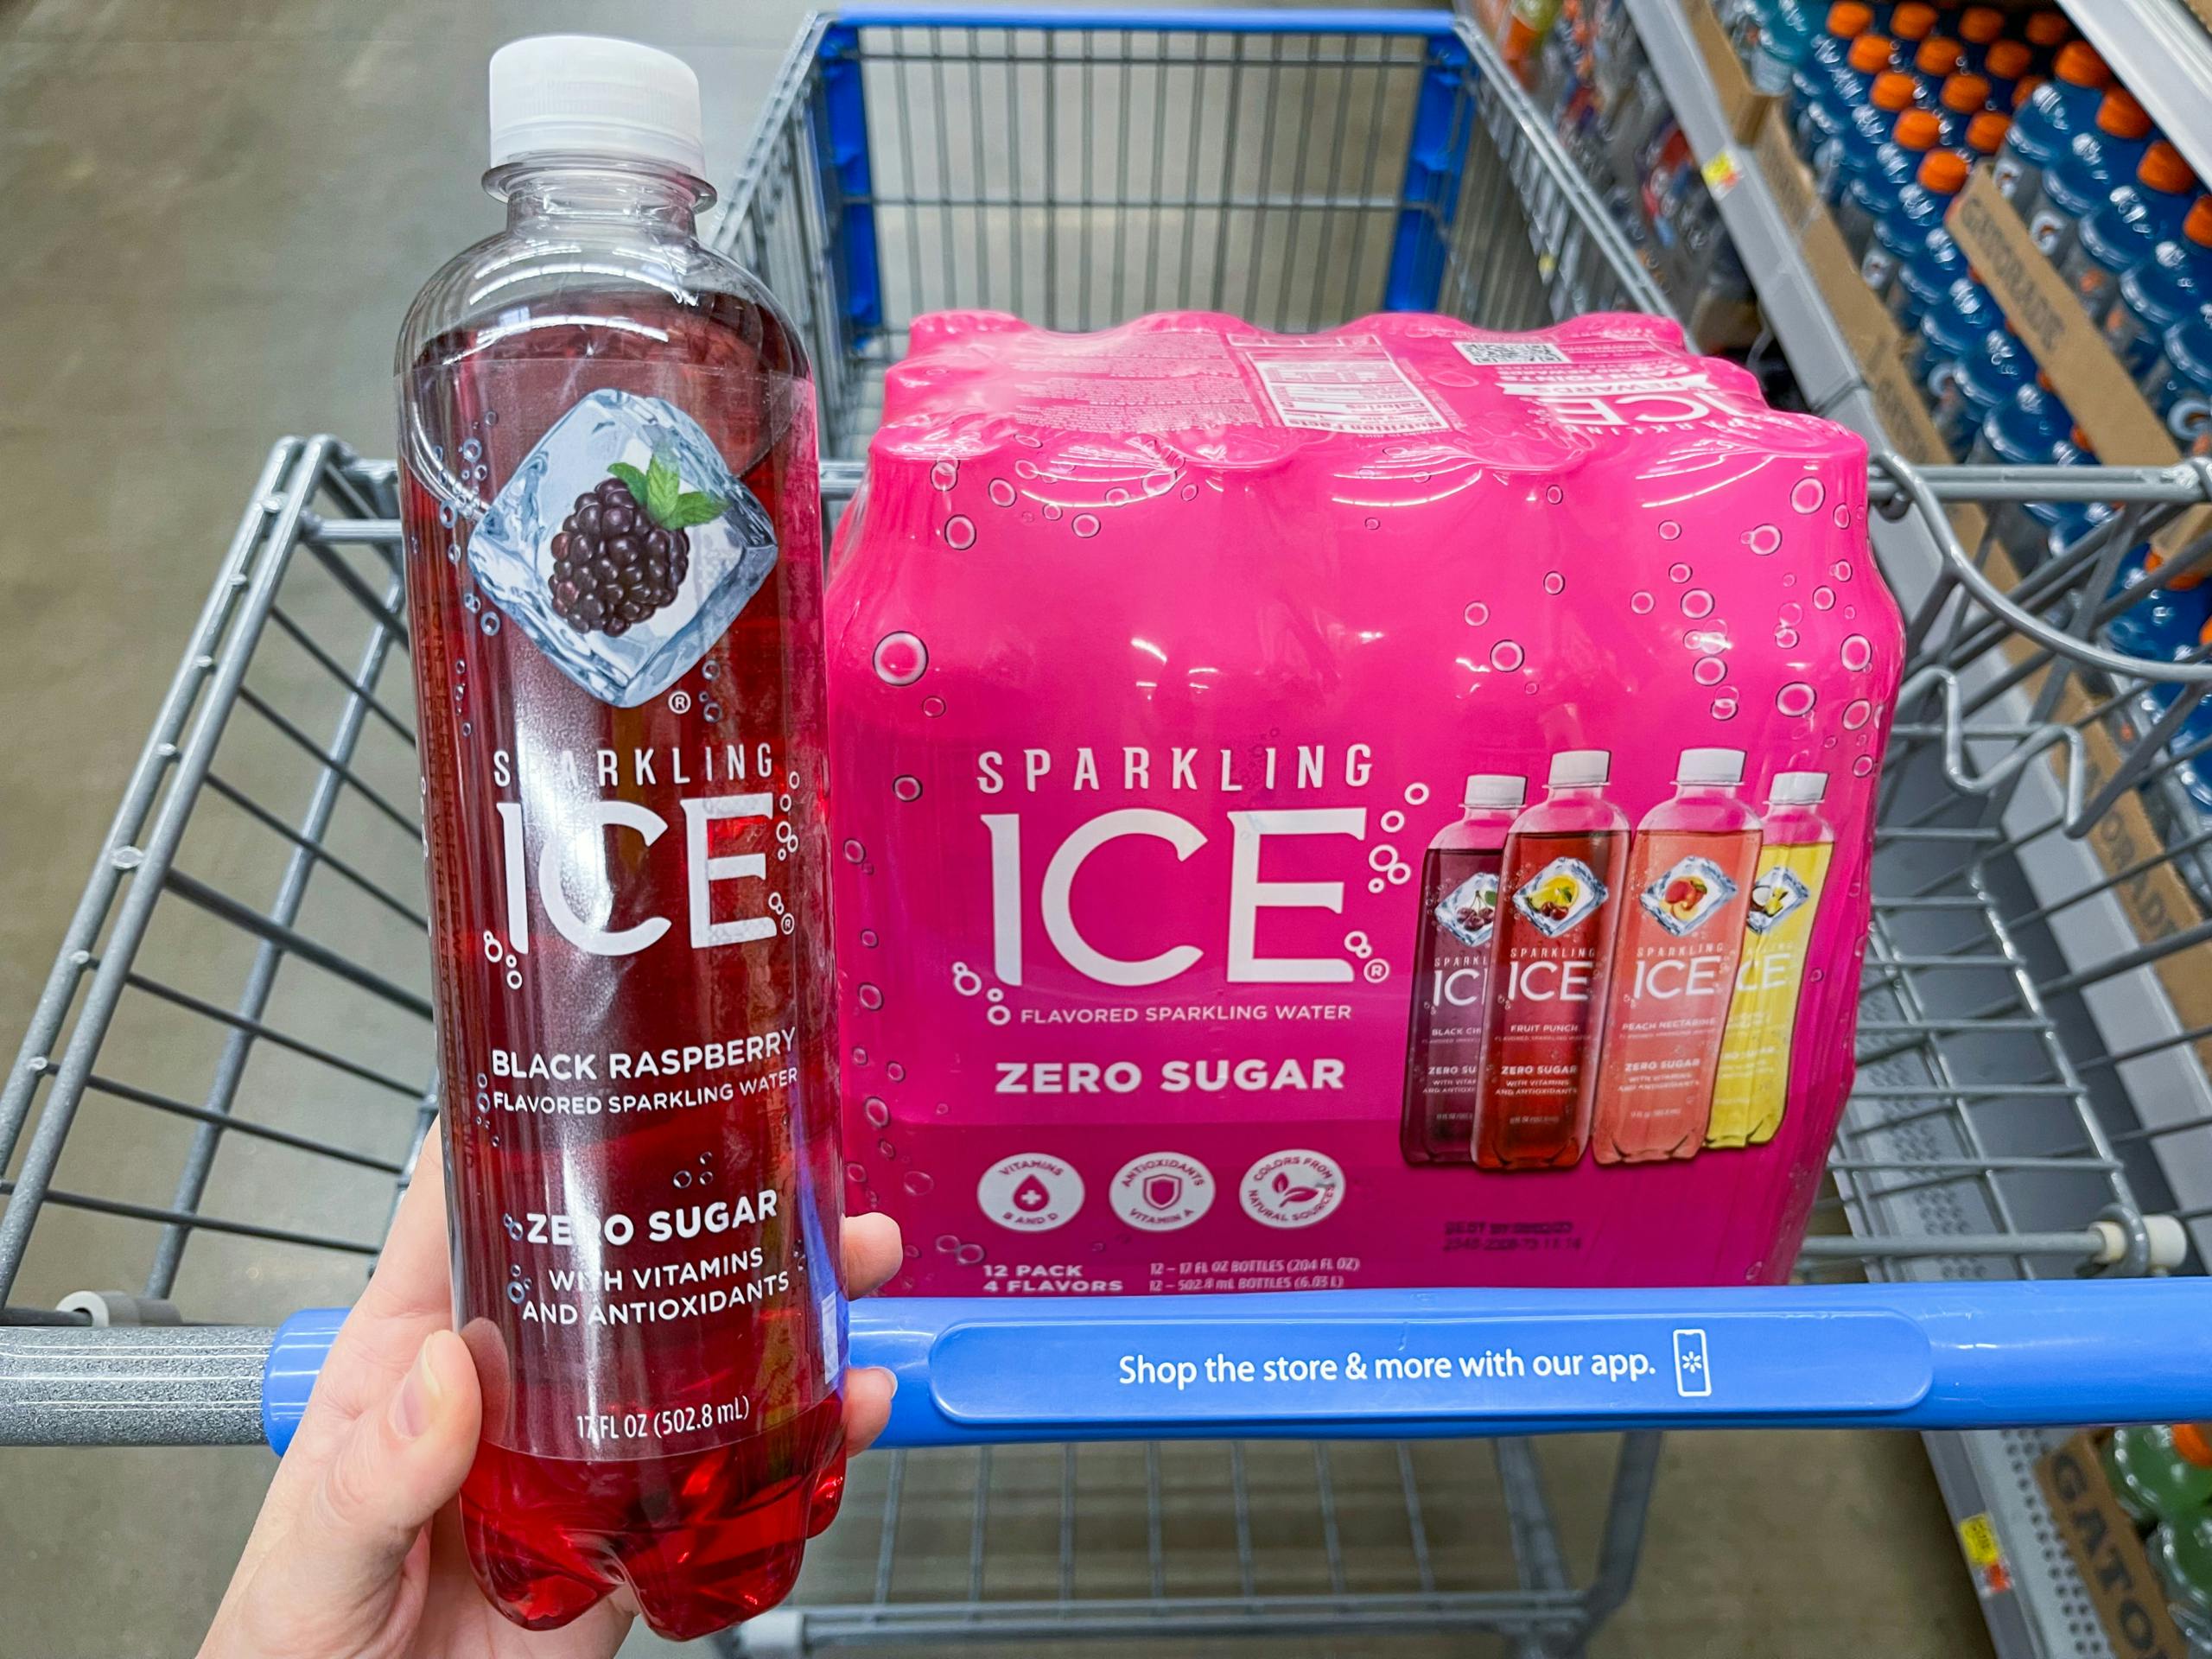 A Sparkling Ice Black Raspberry held out by hand in front of a Sparkling Ice variety package sitting in a store cart.